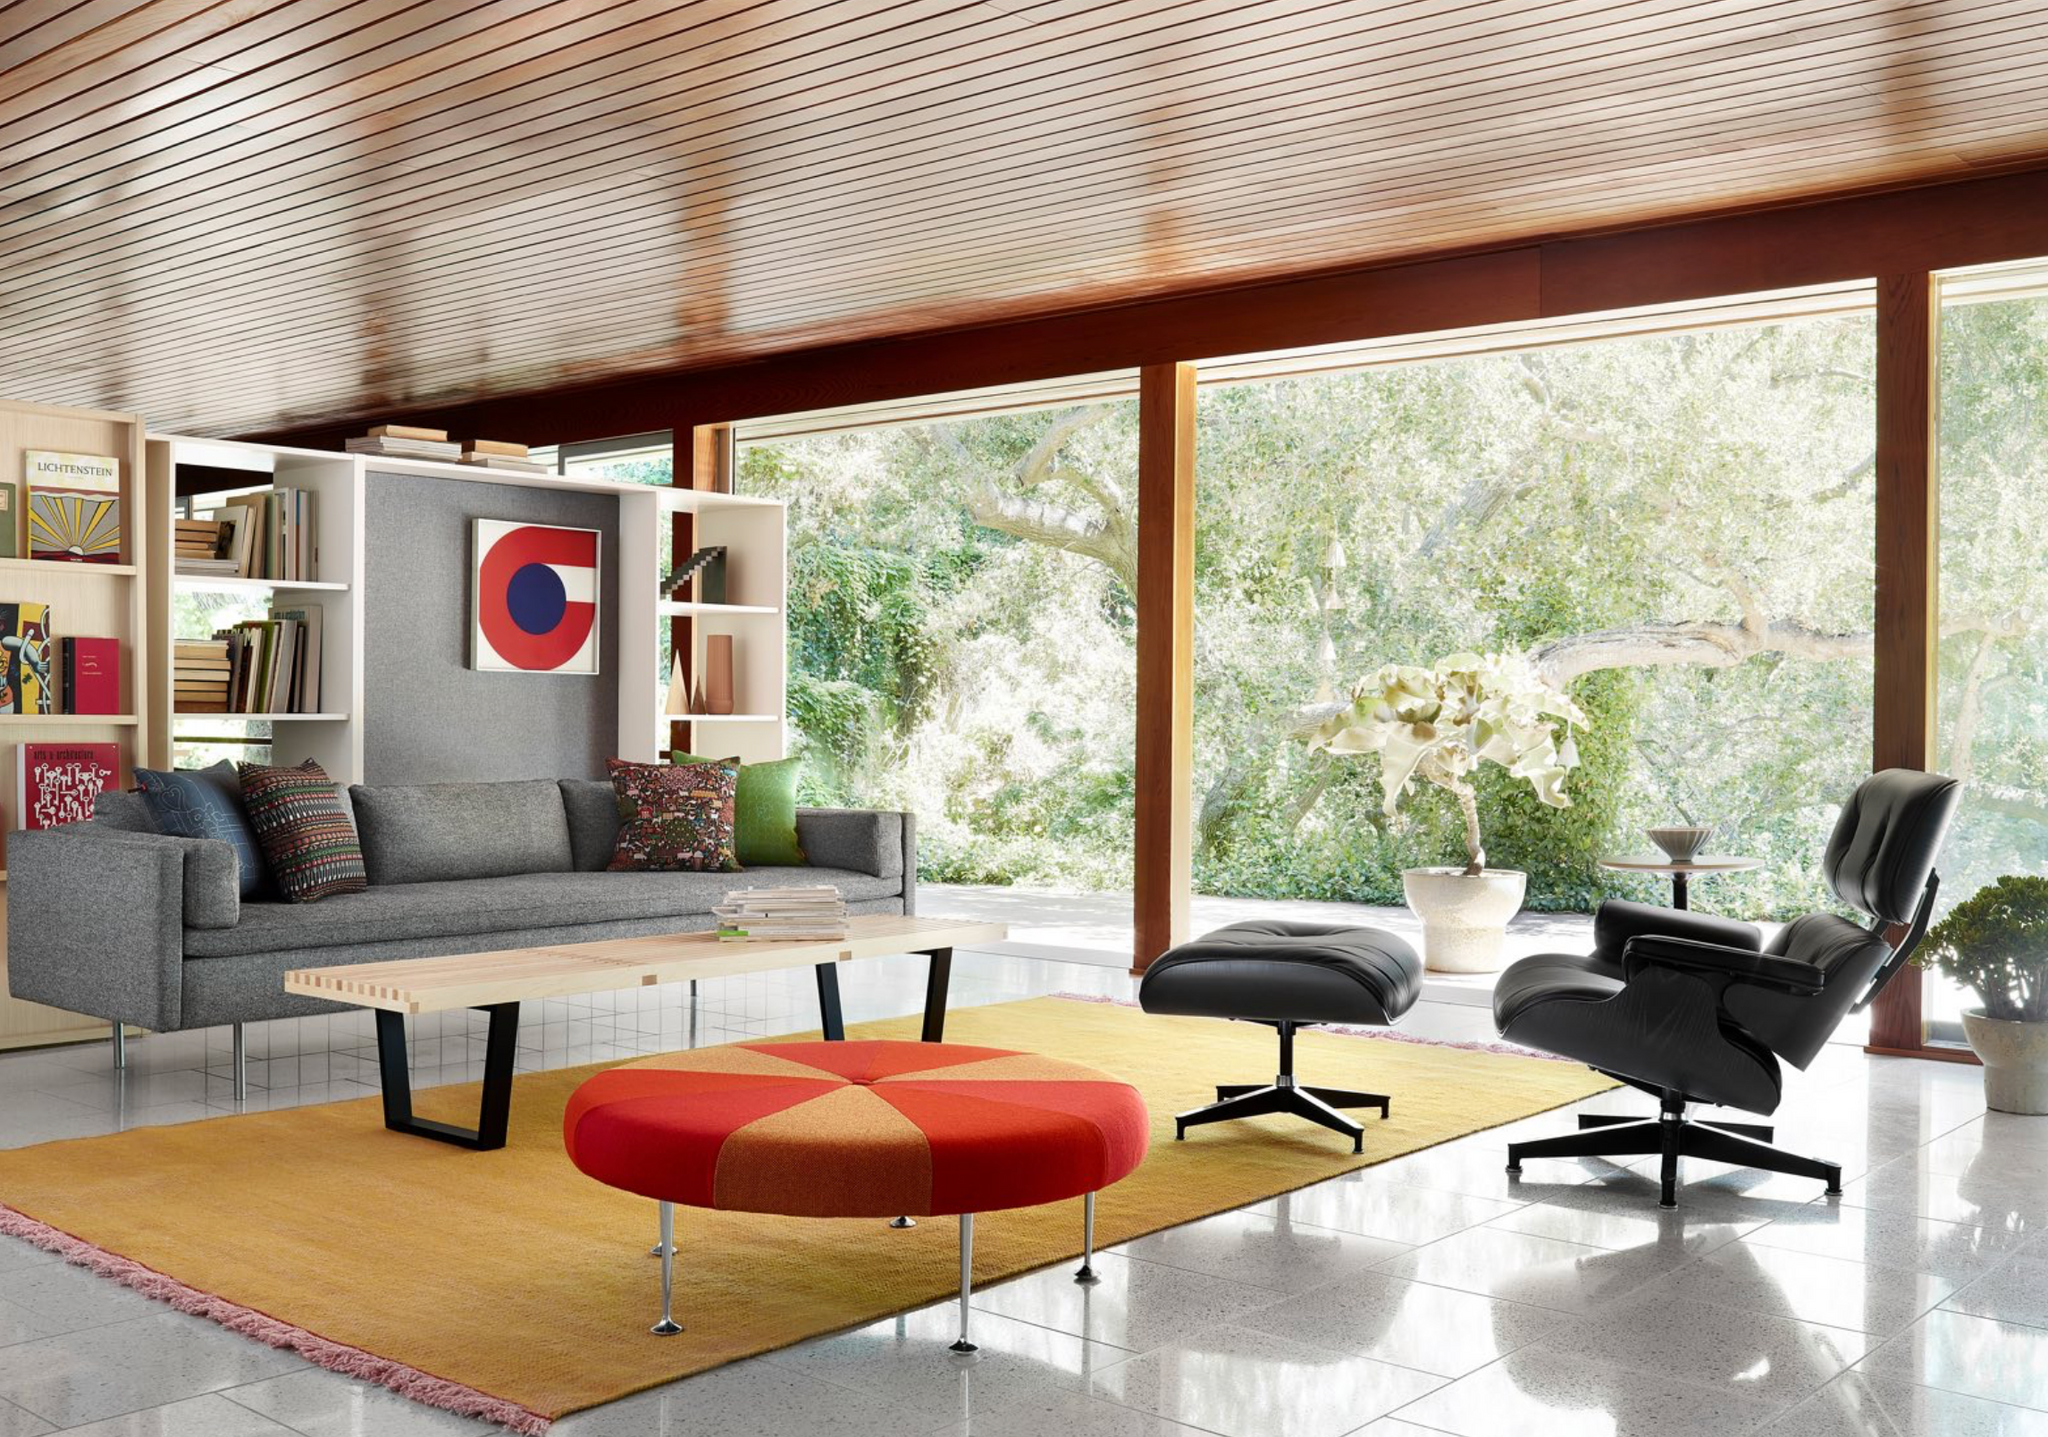 Herman Miller Chair, Couch and Ottoman in a Living Room Settign with Large Window